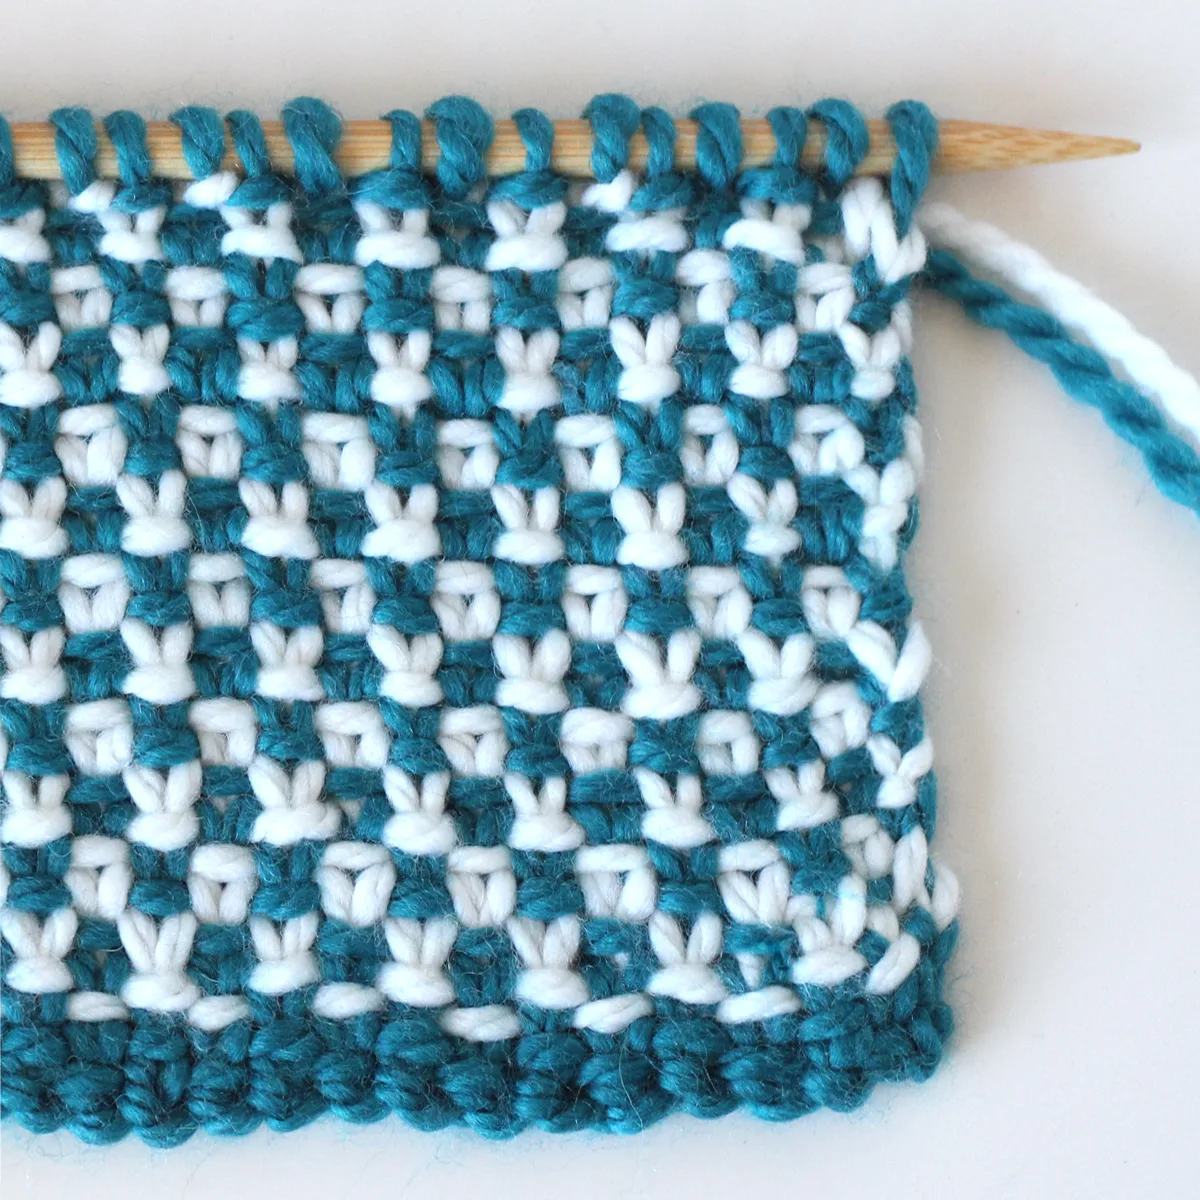 Linen Stitch knitted flat with blue and white yarn colors.